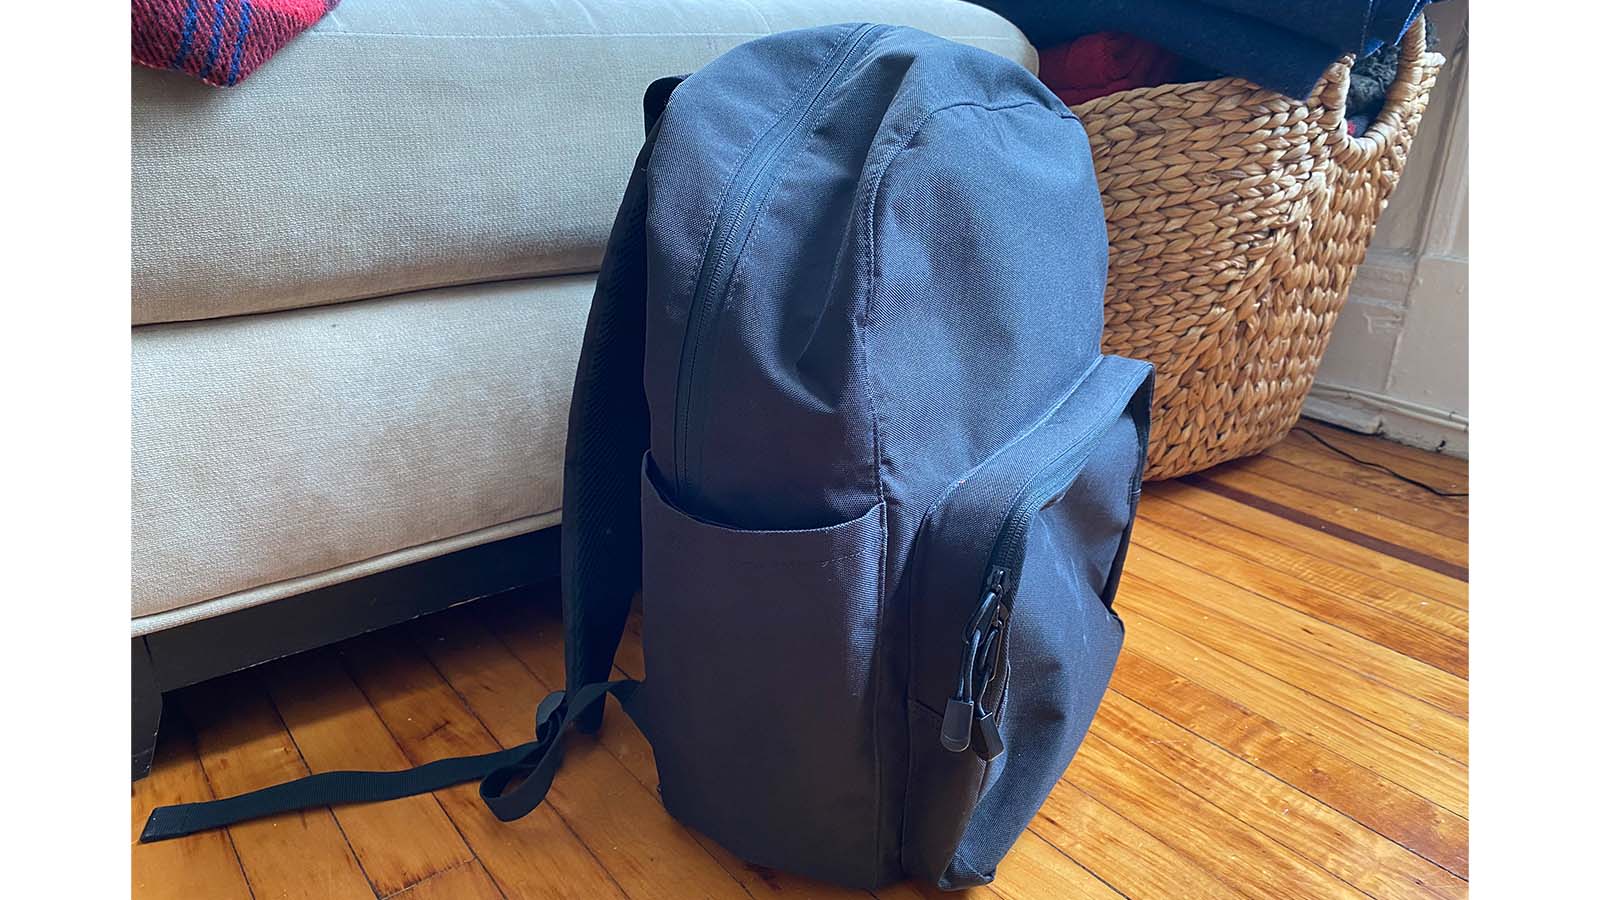 Lo & Sons review: I don't travel anywhere without this bag - Reviewed